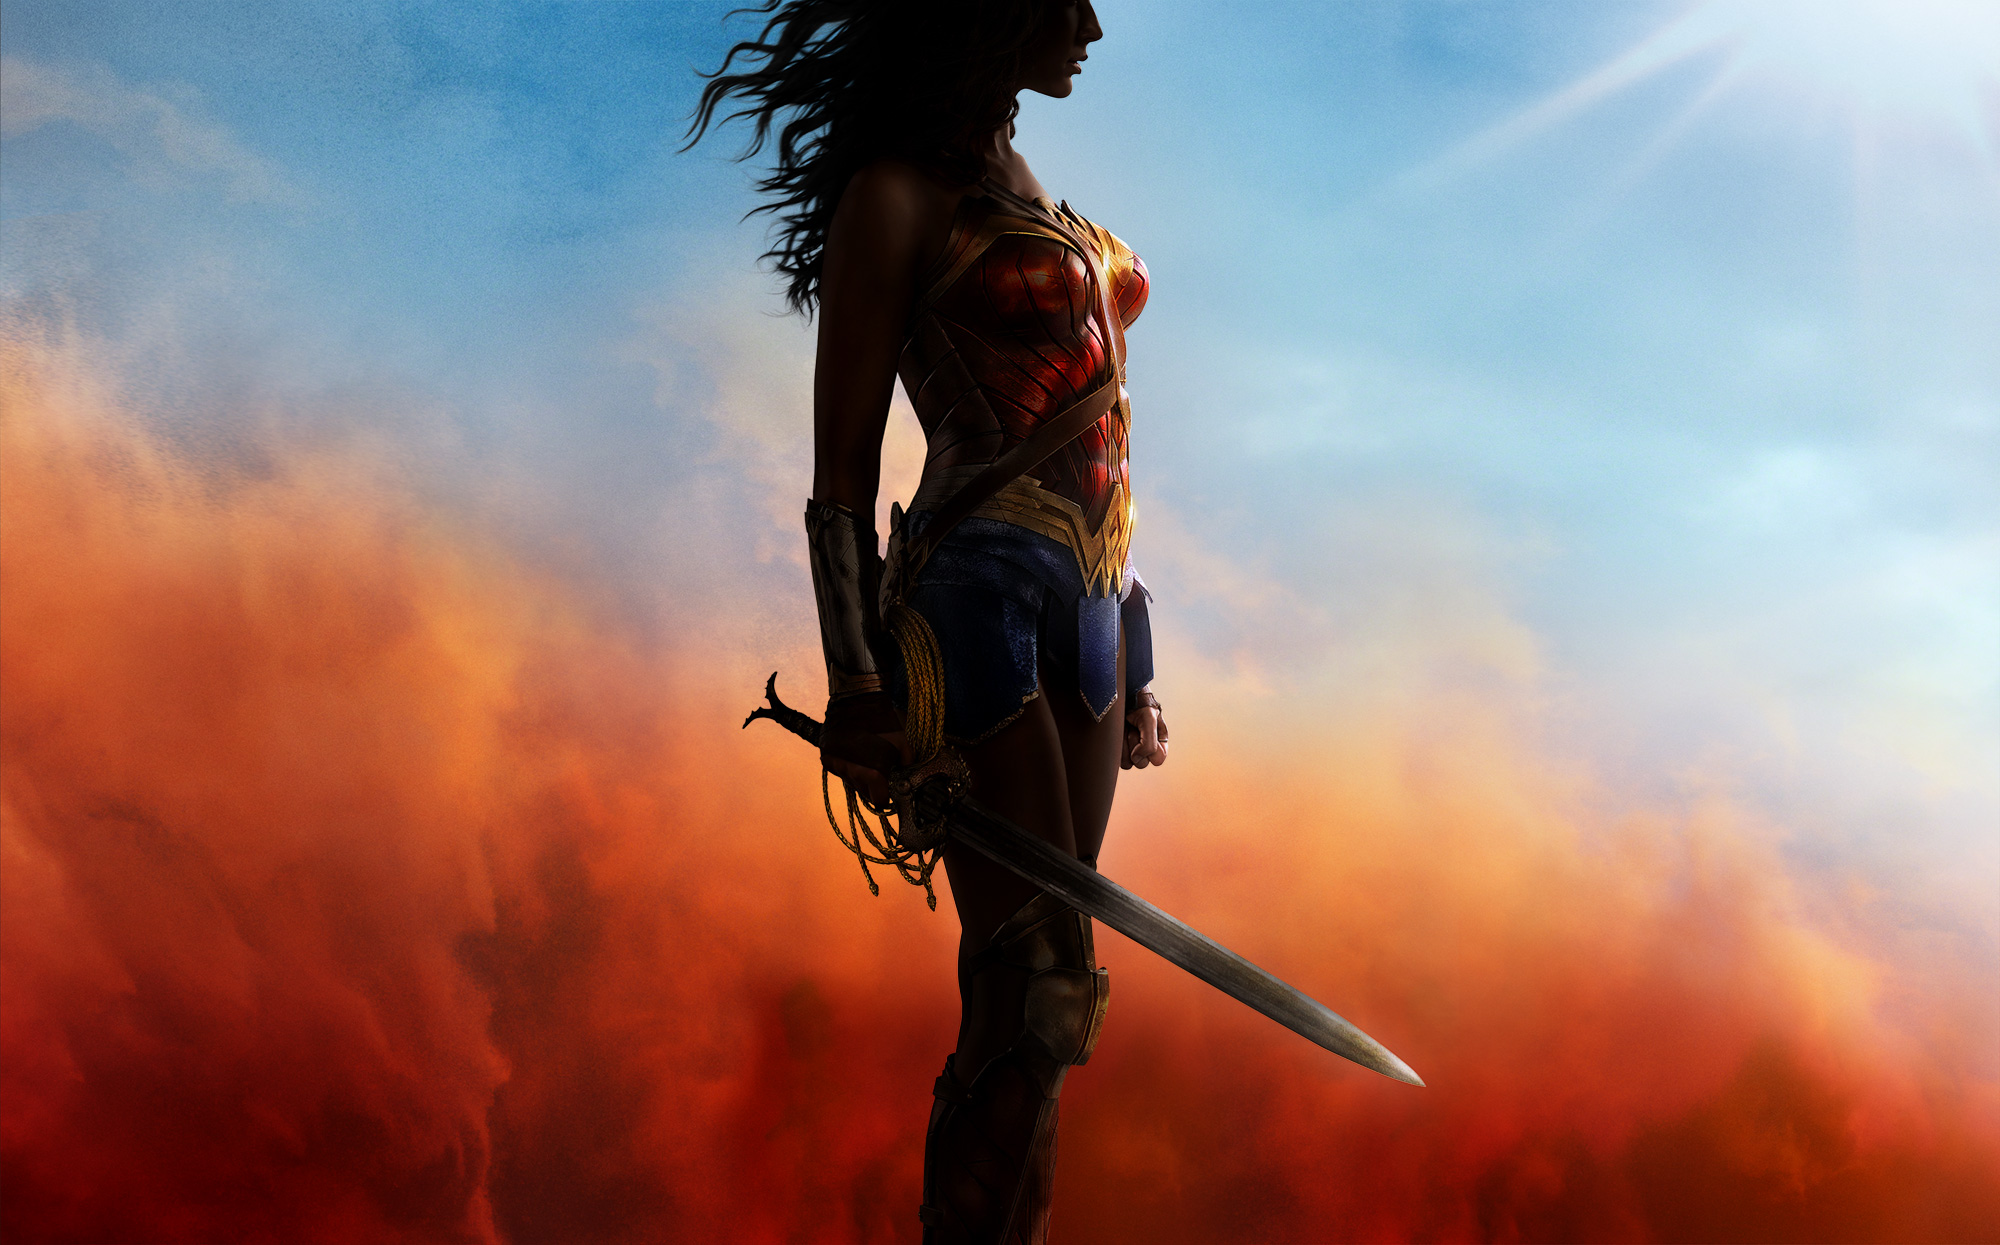 dc comics, wonder woman, gal gadot, movie, diana of themyscira for android